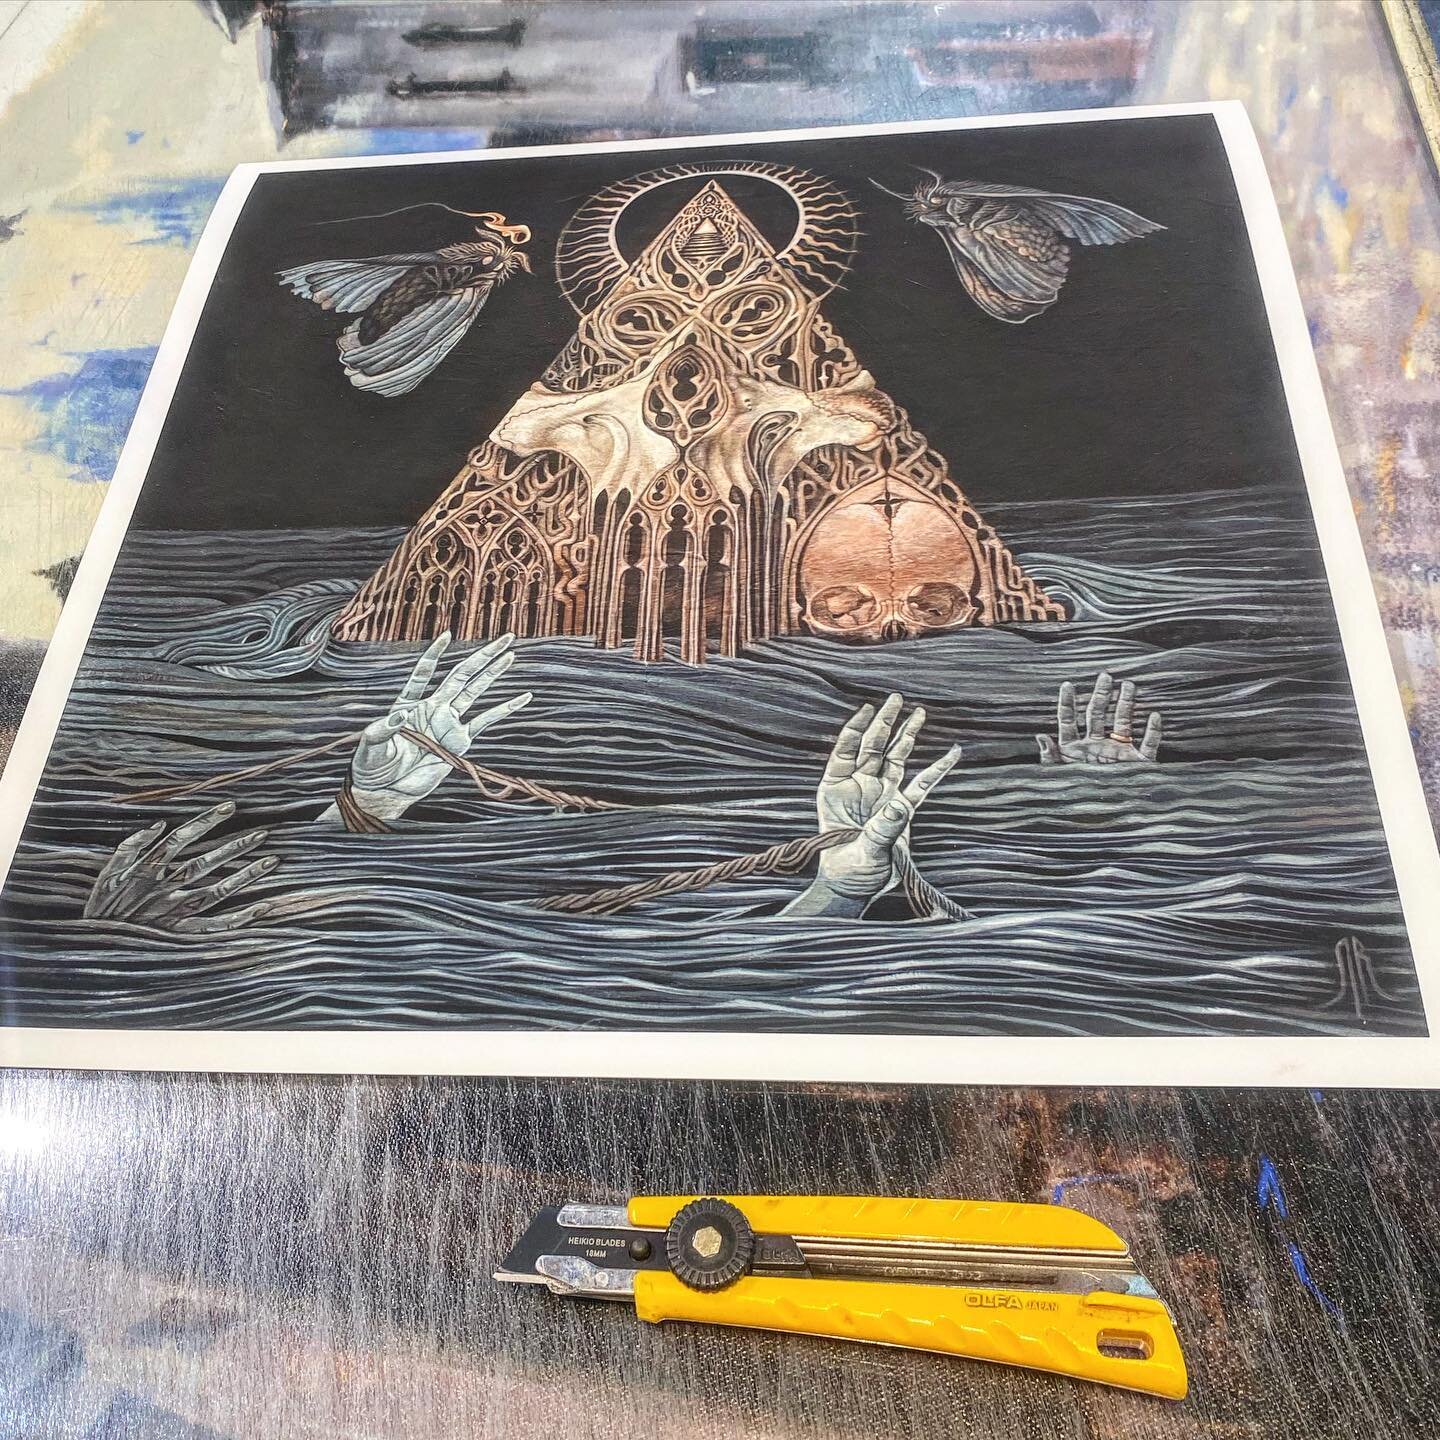 These latest prints by @alexreisfar turned out so well.. go purchase them on his website now before they run out! #tool #toolband #drowning #metal #skulls #gates #skull #bones #fineart #art #printing #prints #pdxart #pdxartist #pdx #local #smallbusin